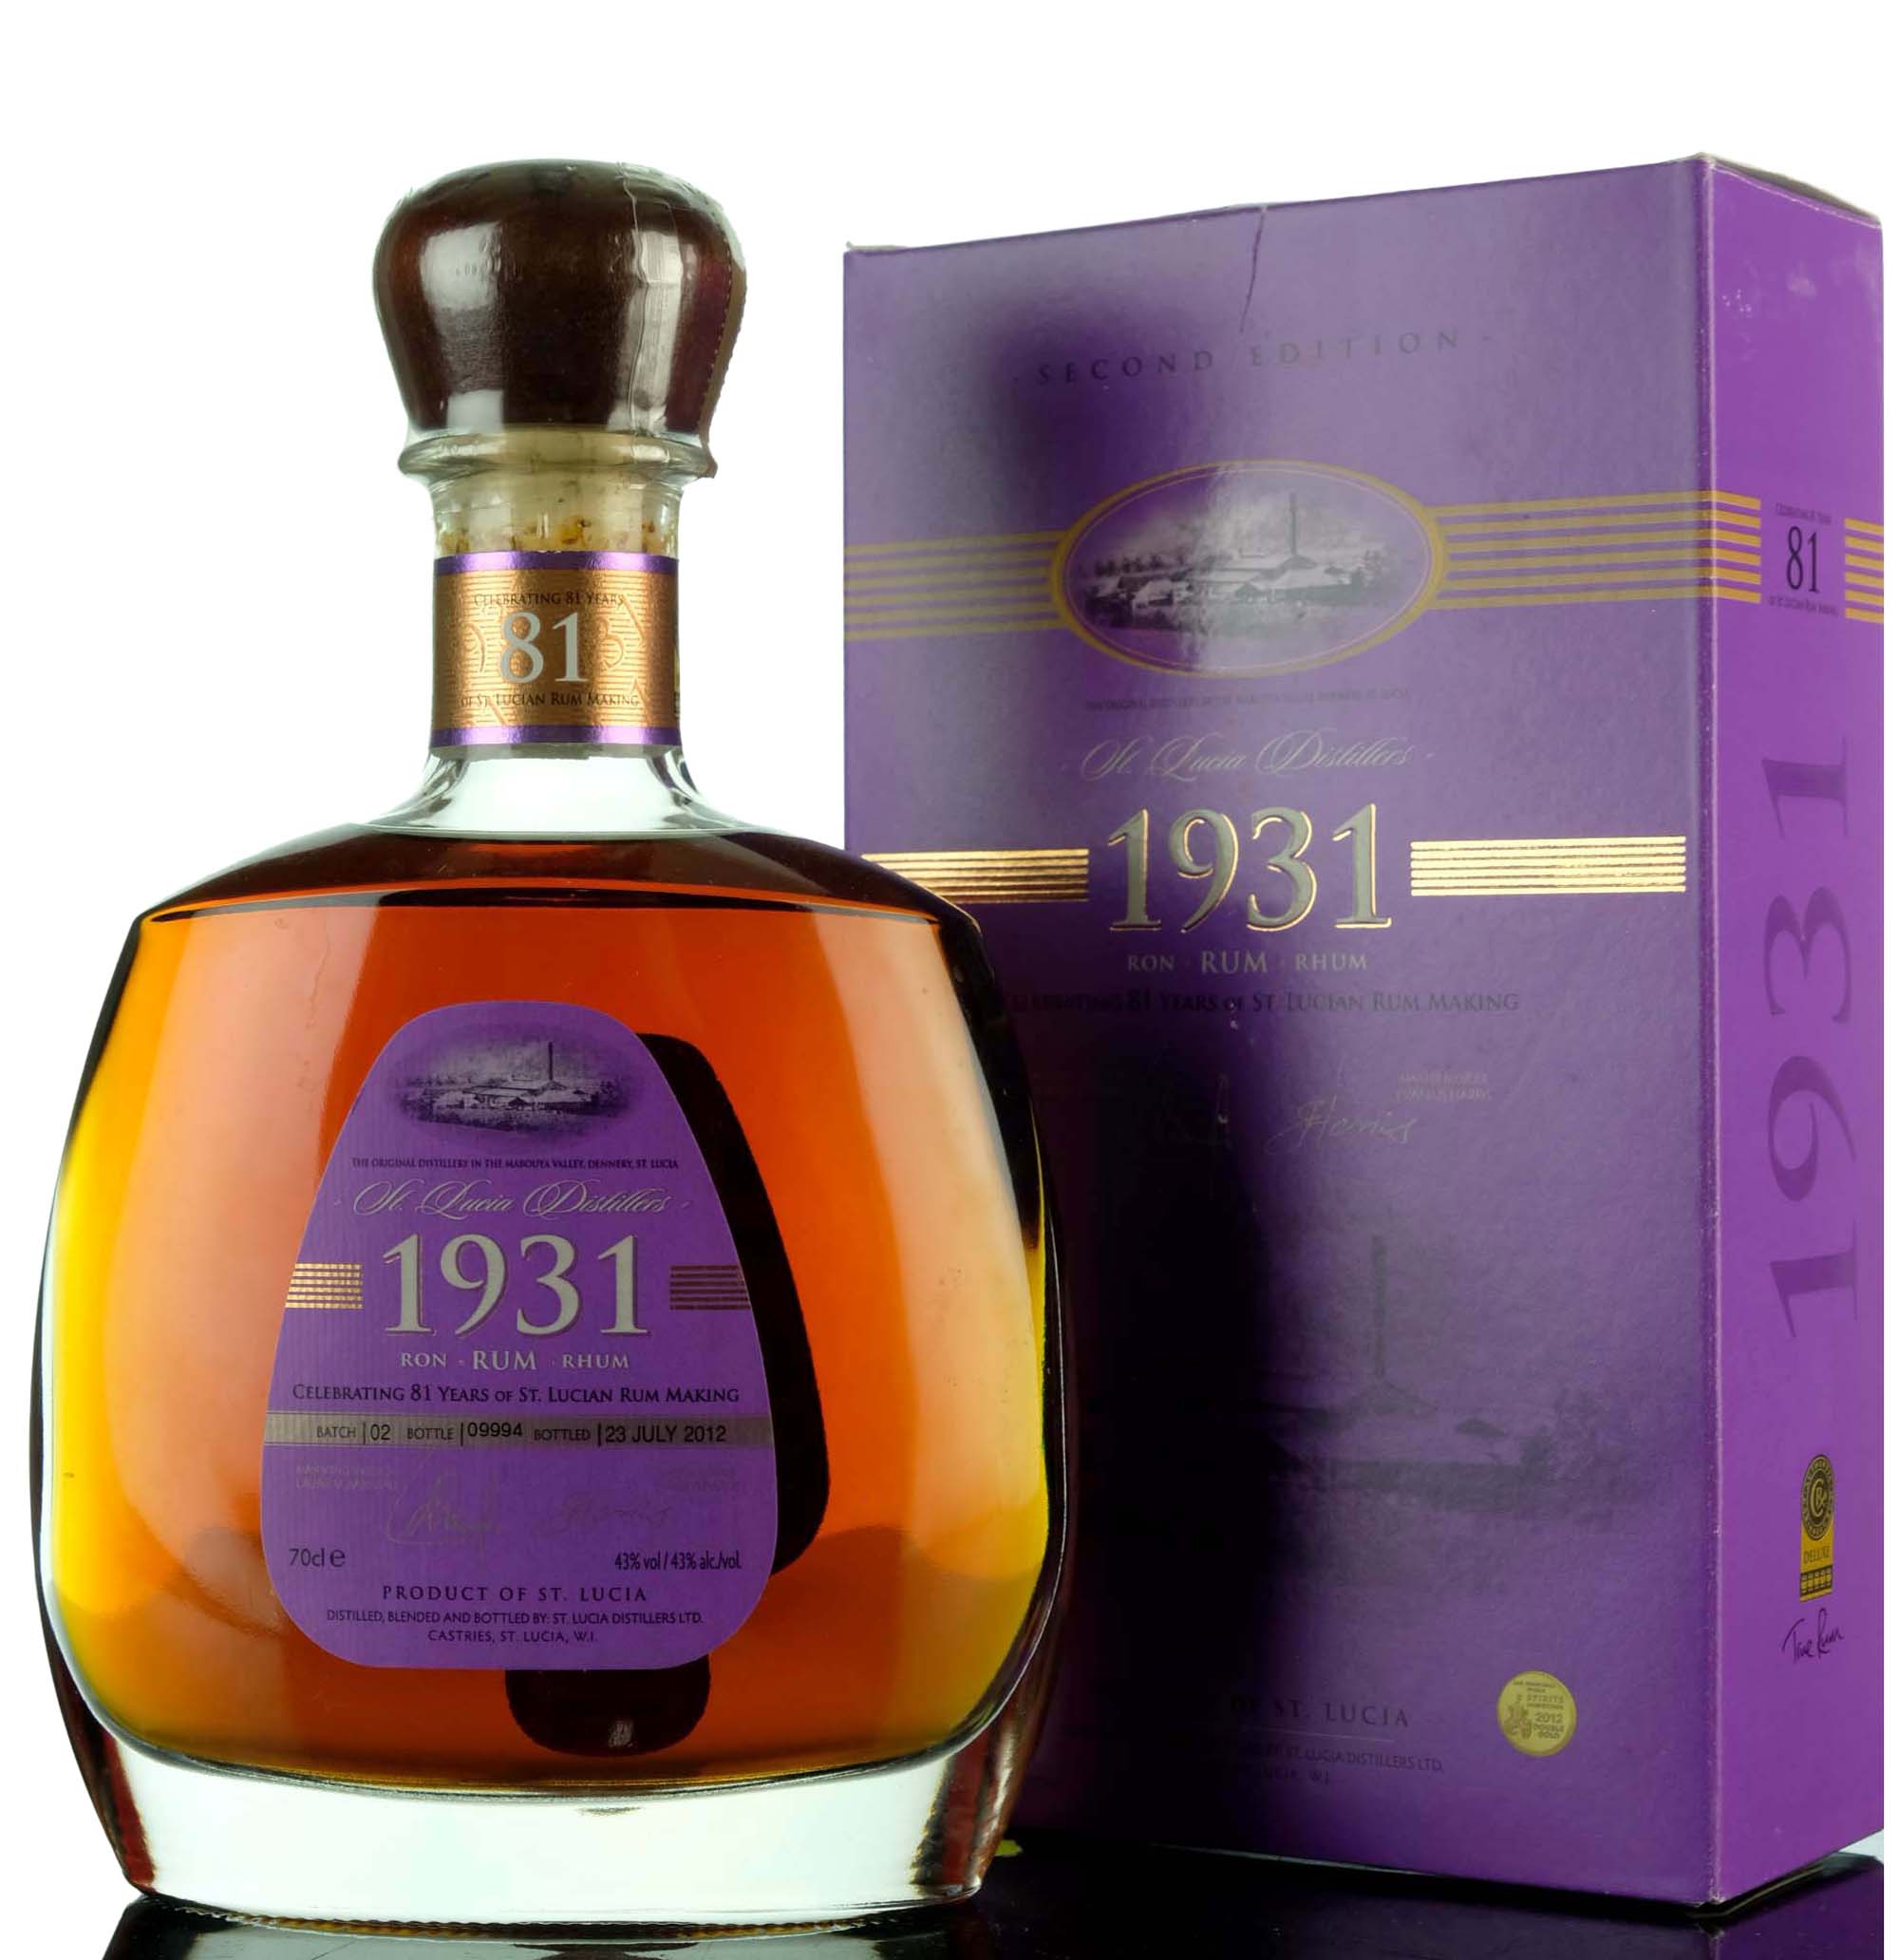 St Lucia Distillers 1931 Rum - Celebrating 81 Years - Batch 2 - 2012 Release